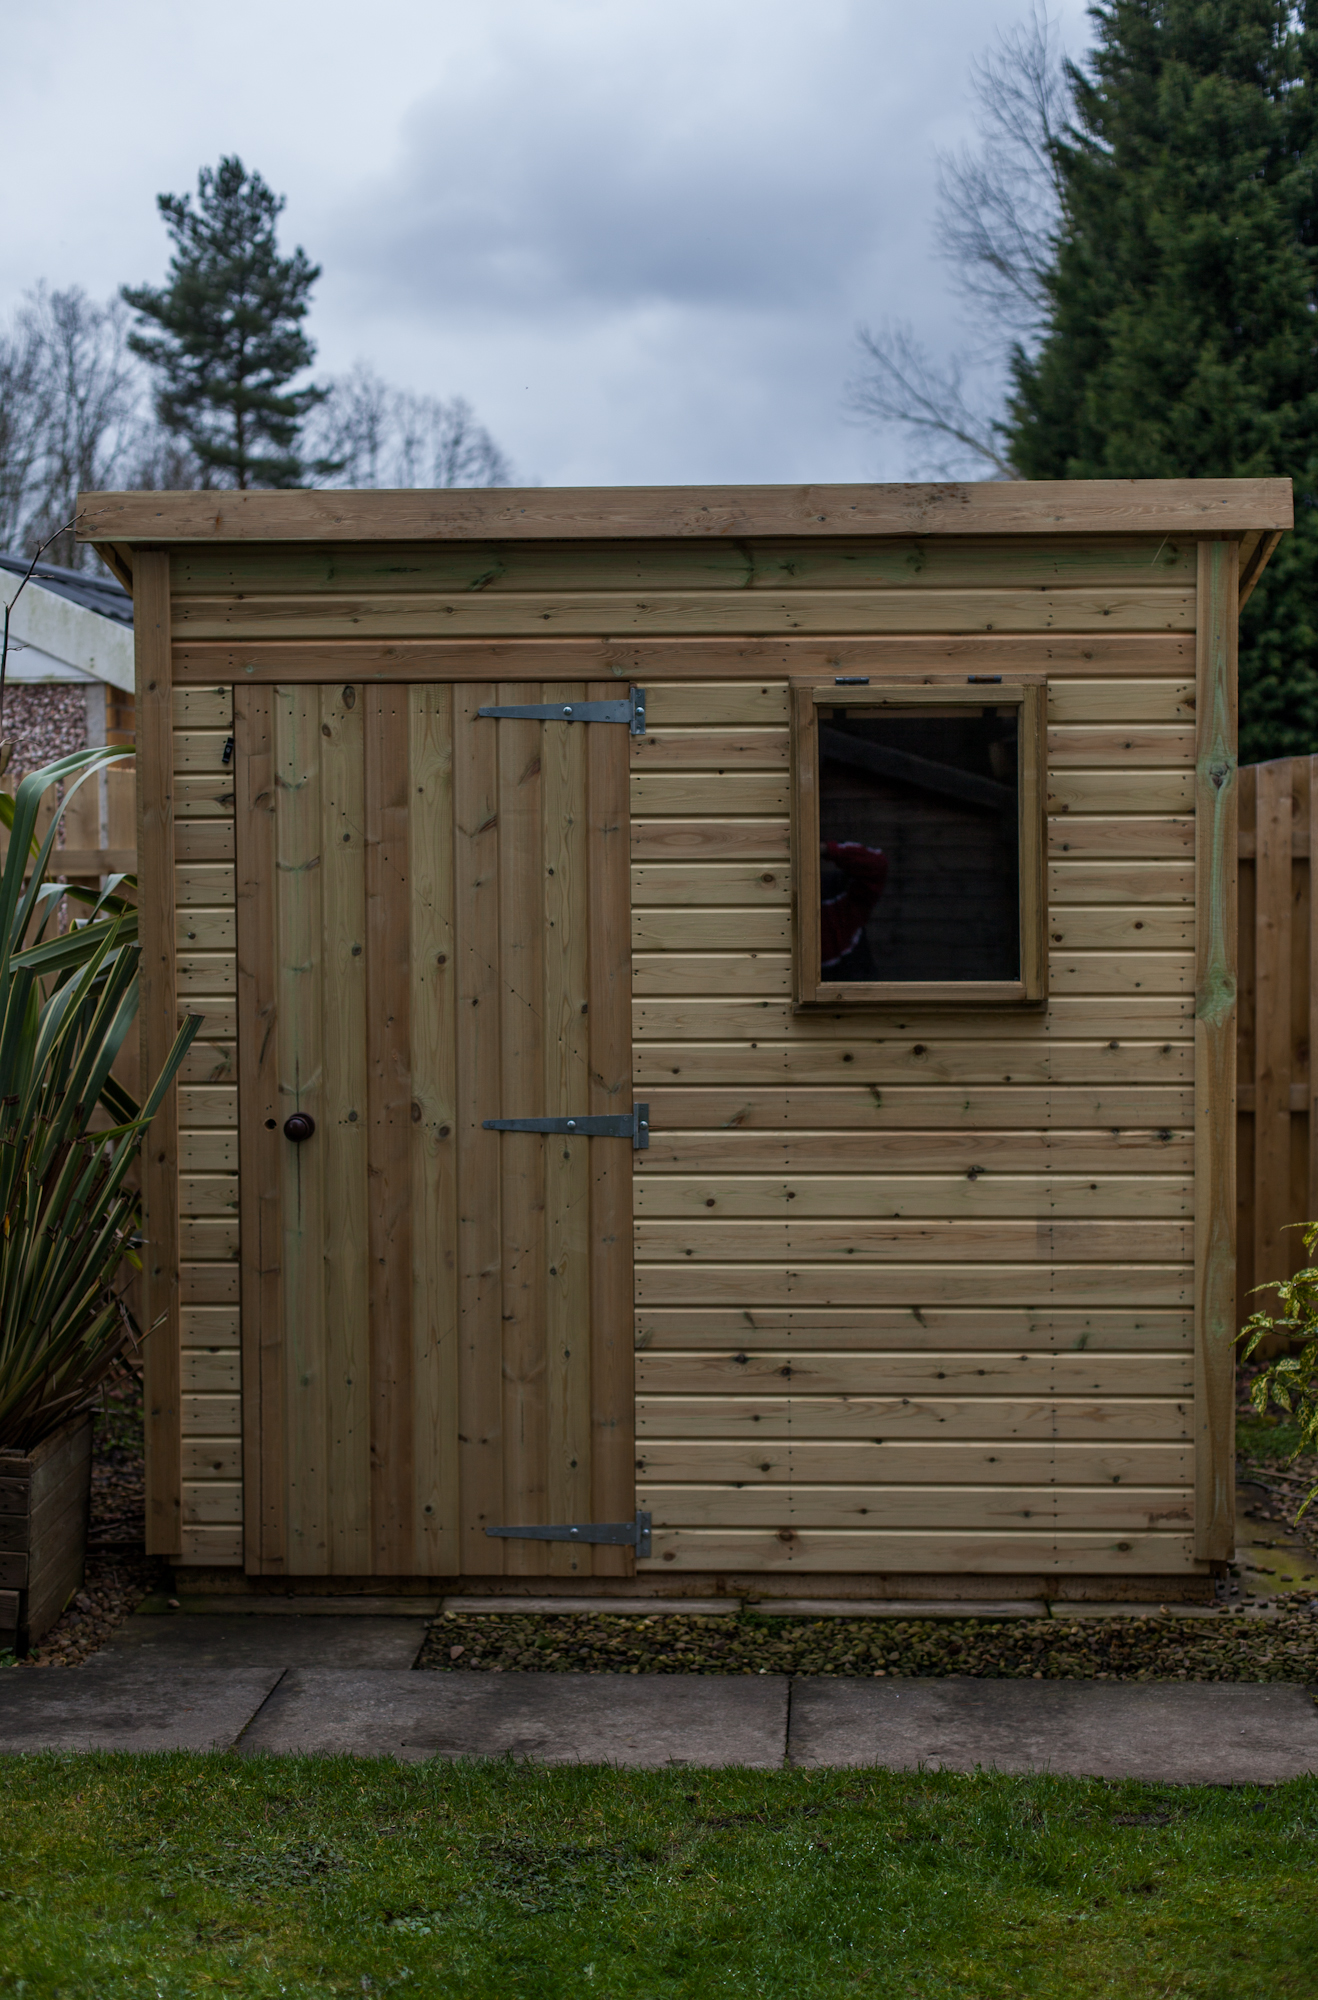 8x8 sheds - who has the best?